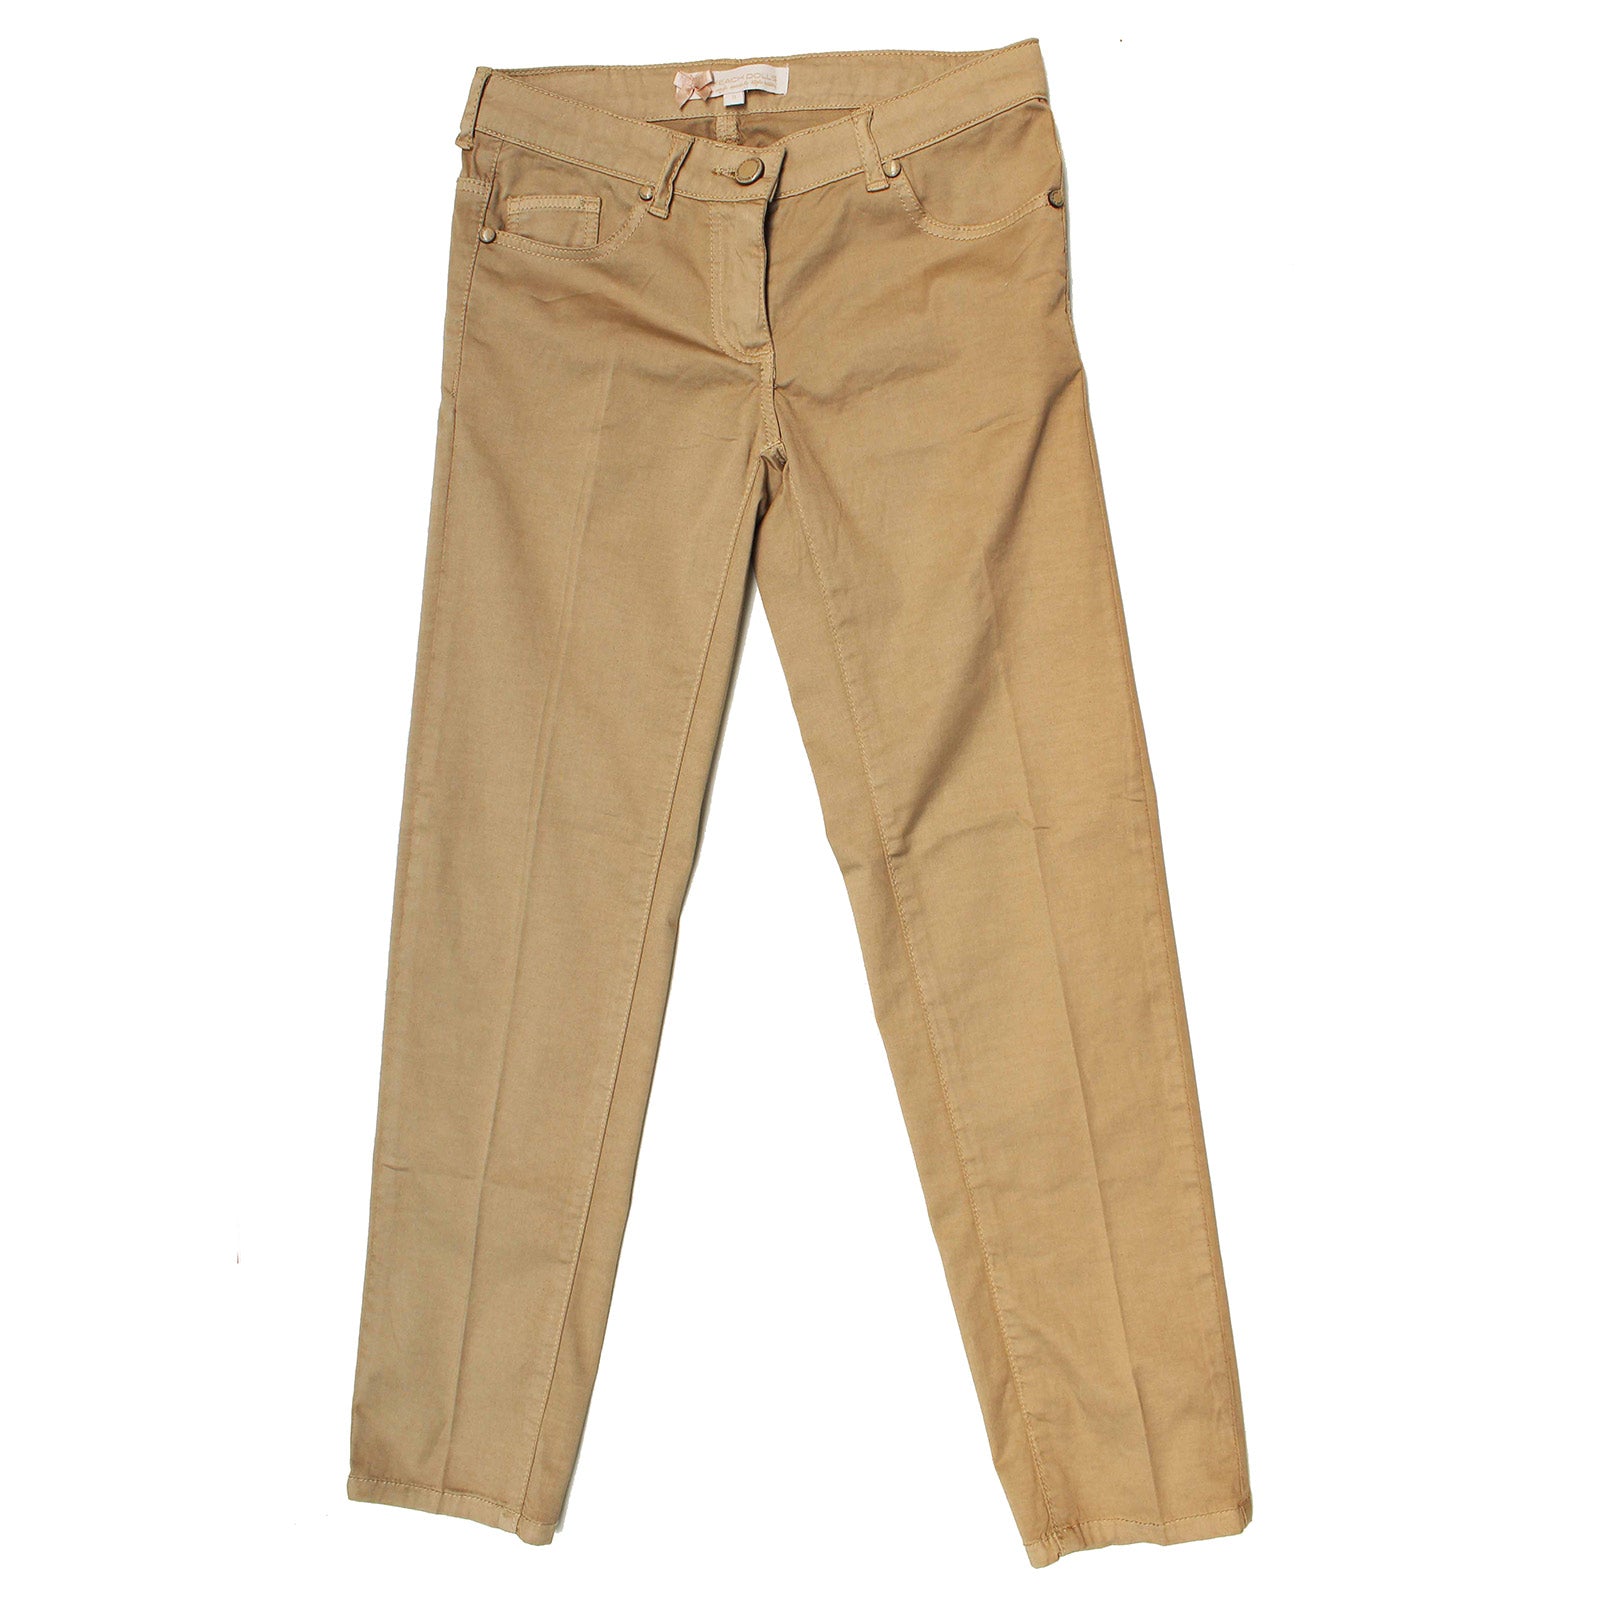 
  Trousers from the Silvian Heach girl's clothing line with adjustable five-pocket size inside.
...